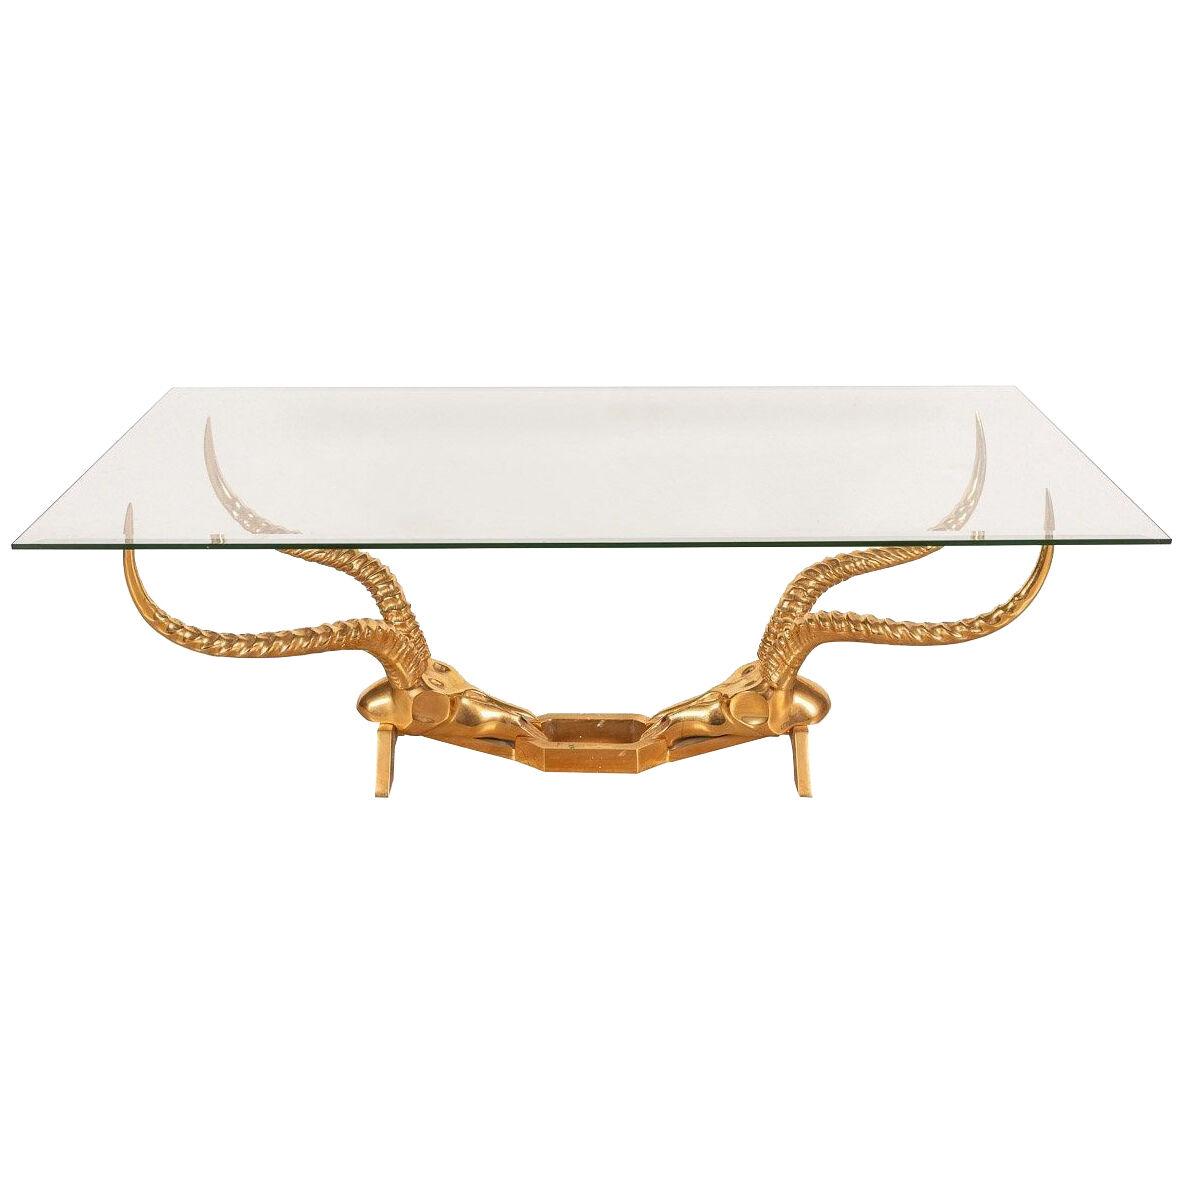 20th Century "Antelope" Coffee Table By Dikran Khoubesserian For Fondica, c.1970